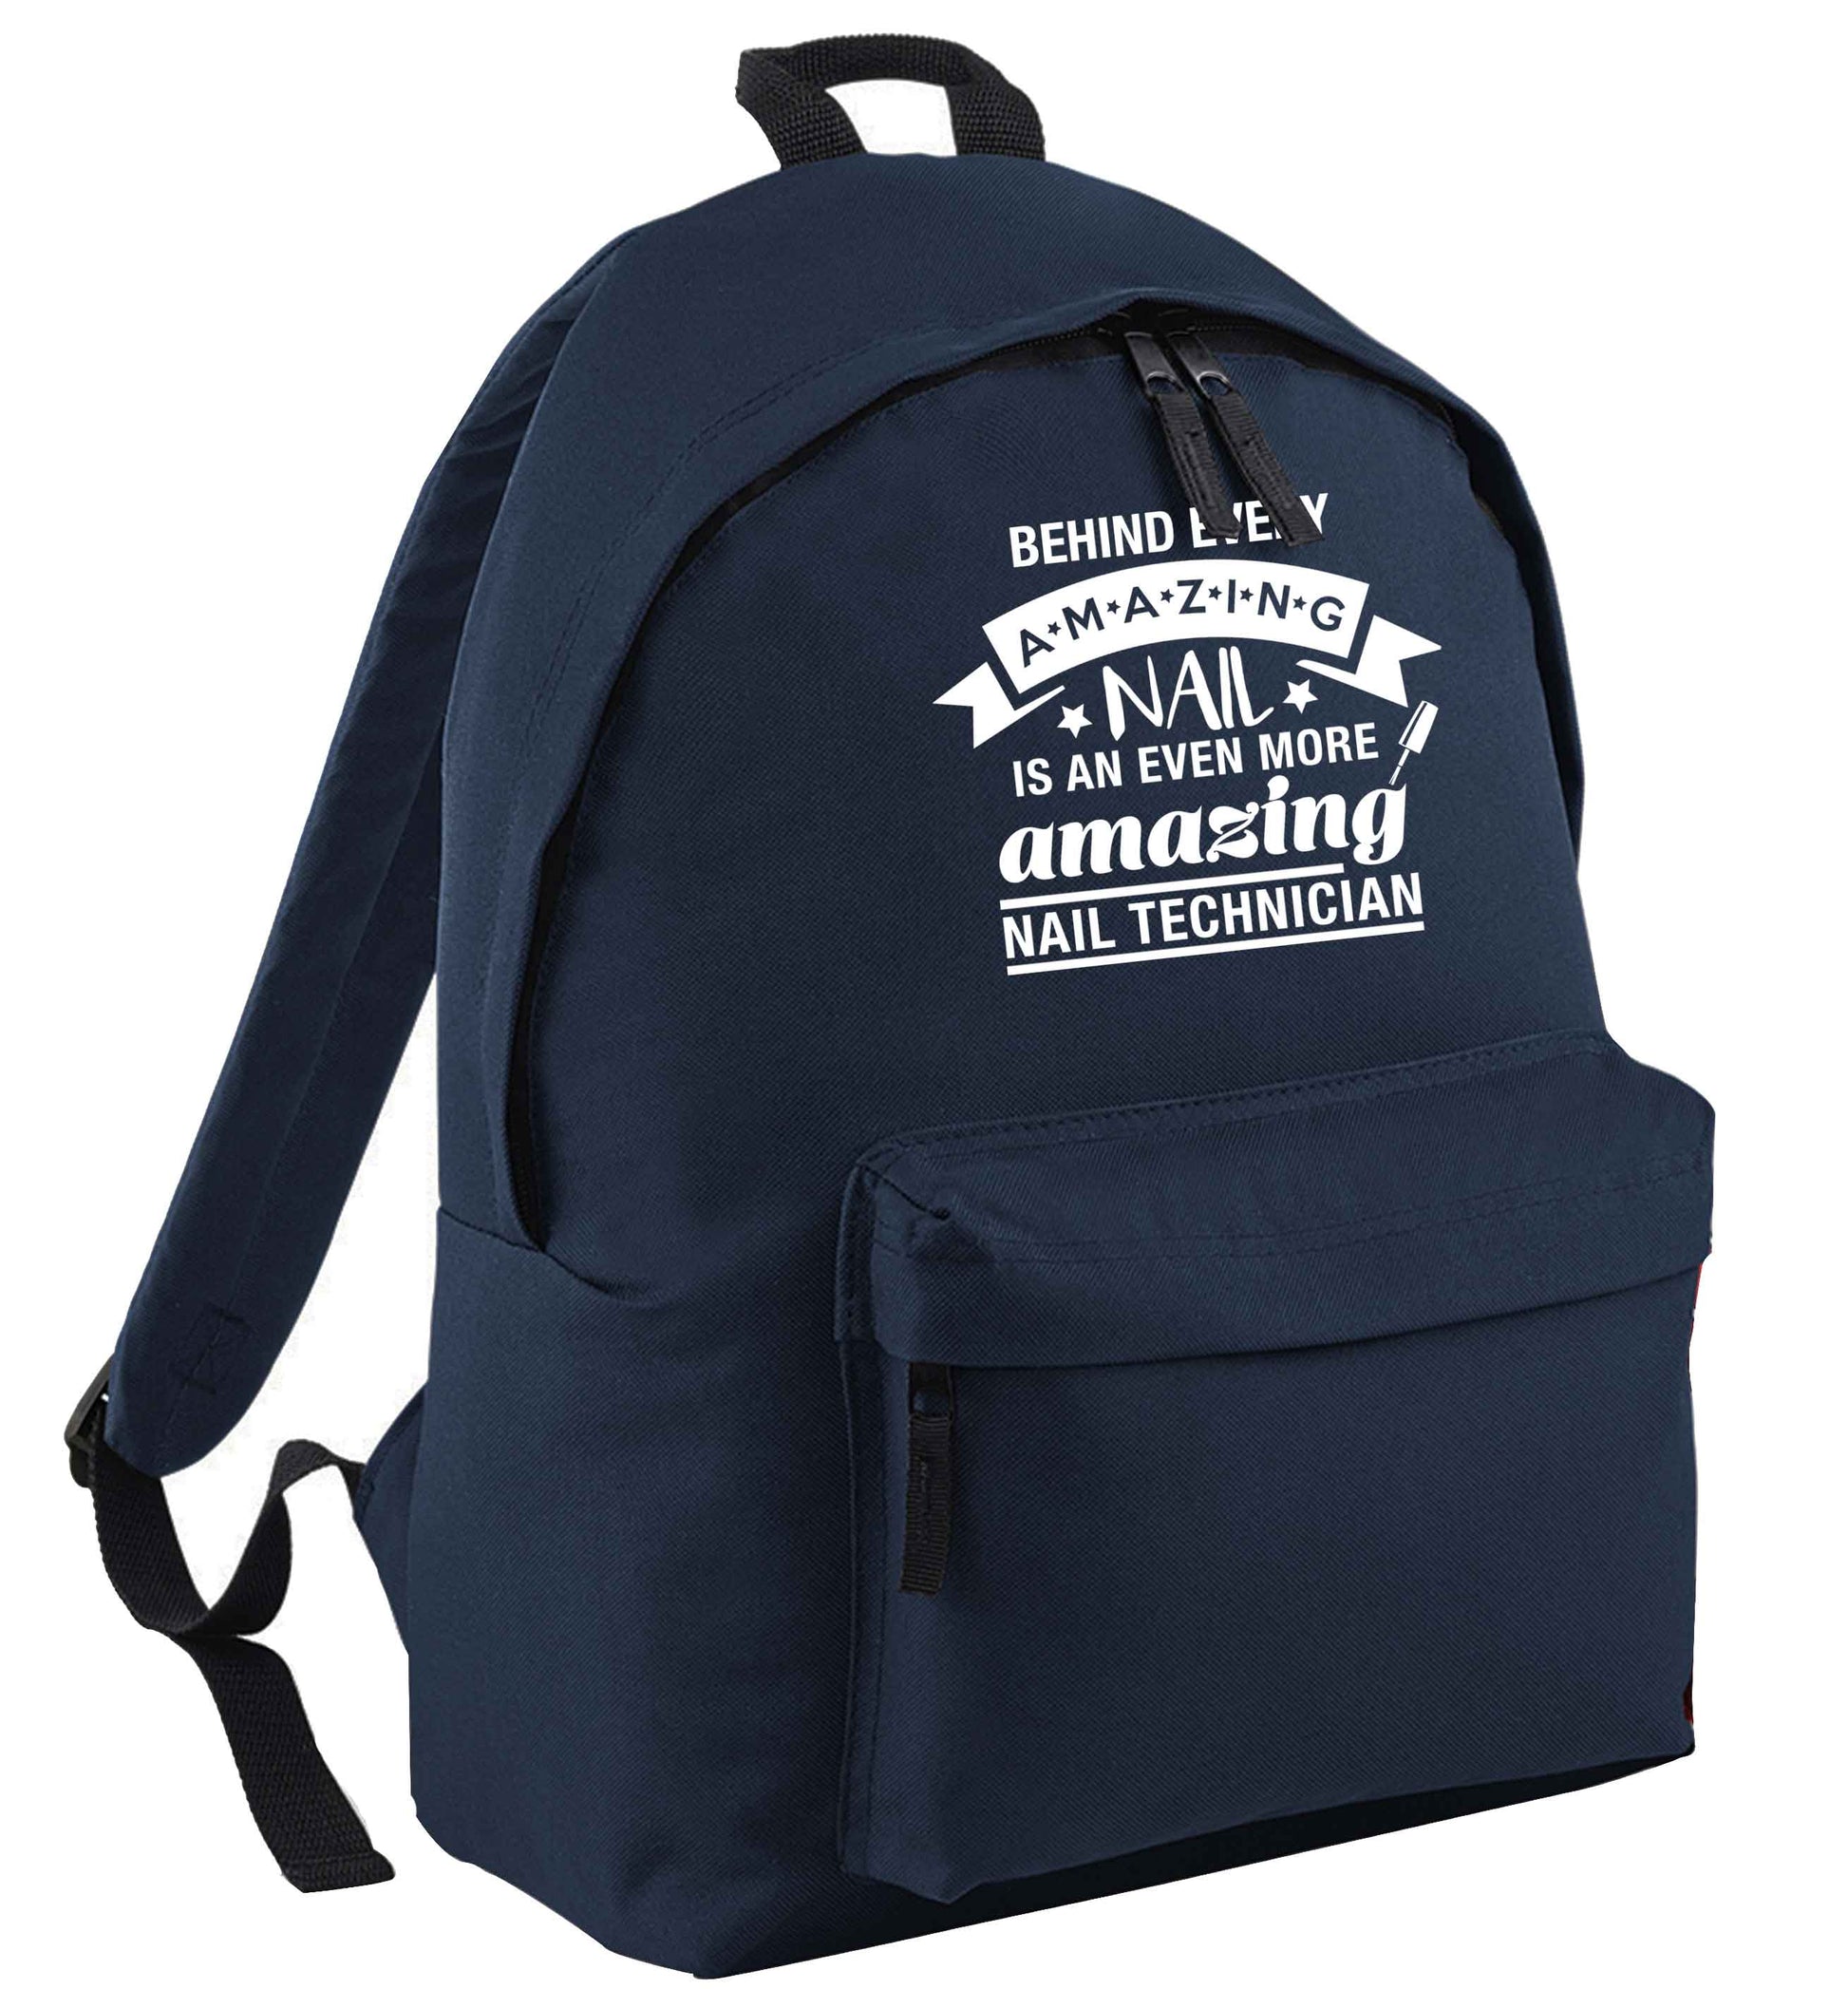 Behind every amazing nail is an even more amazing nail technician navy adults backpack